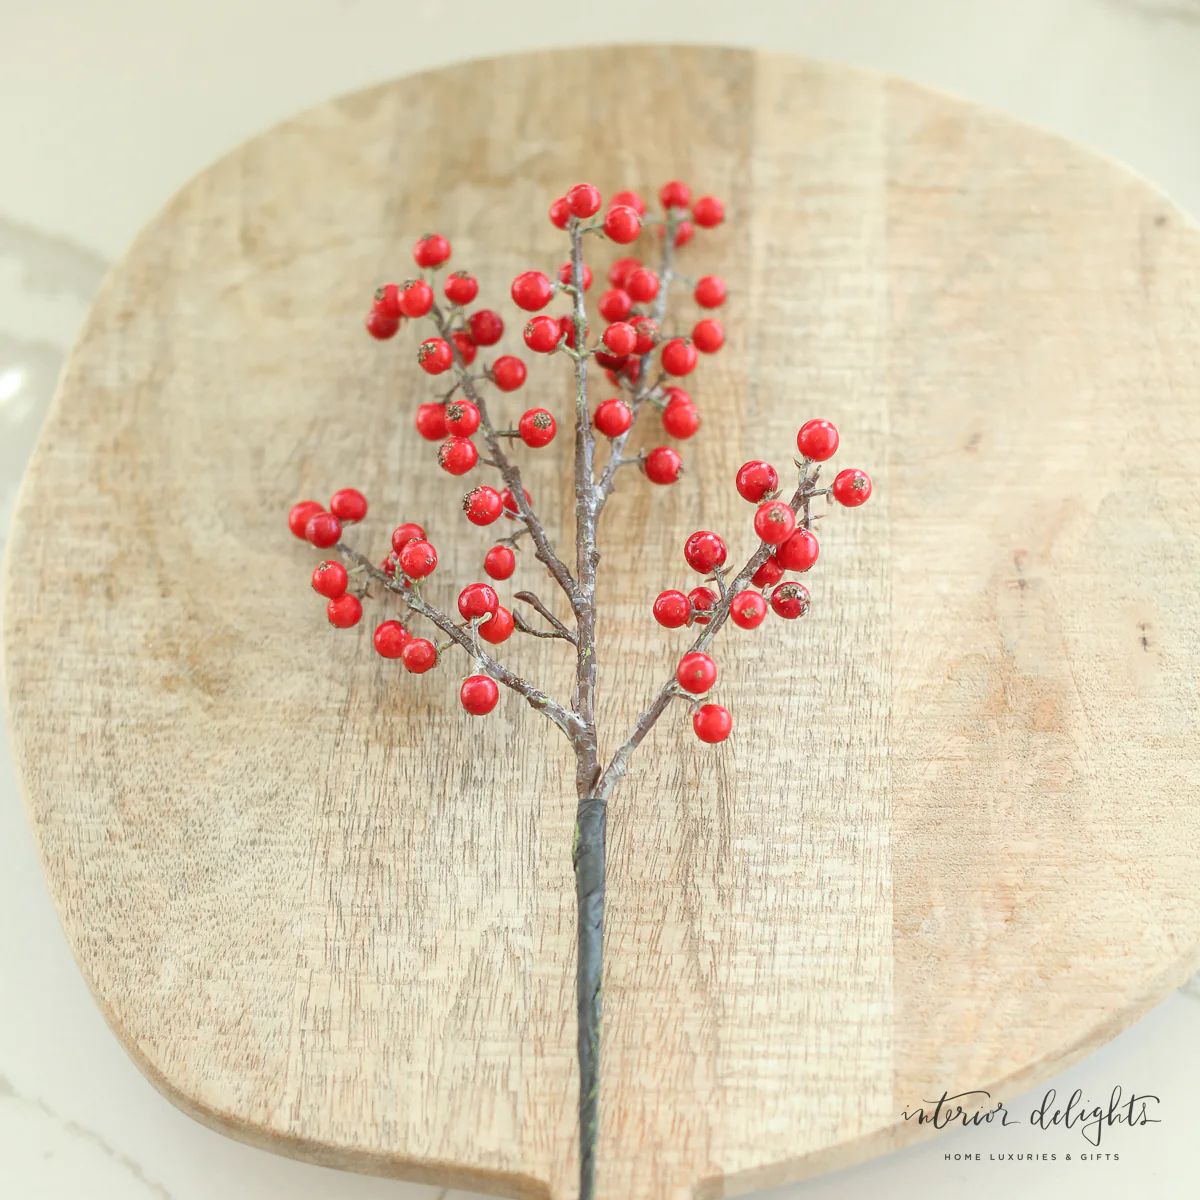 13" Red Berry Pick *Final Sale* | Interior Delights